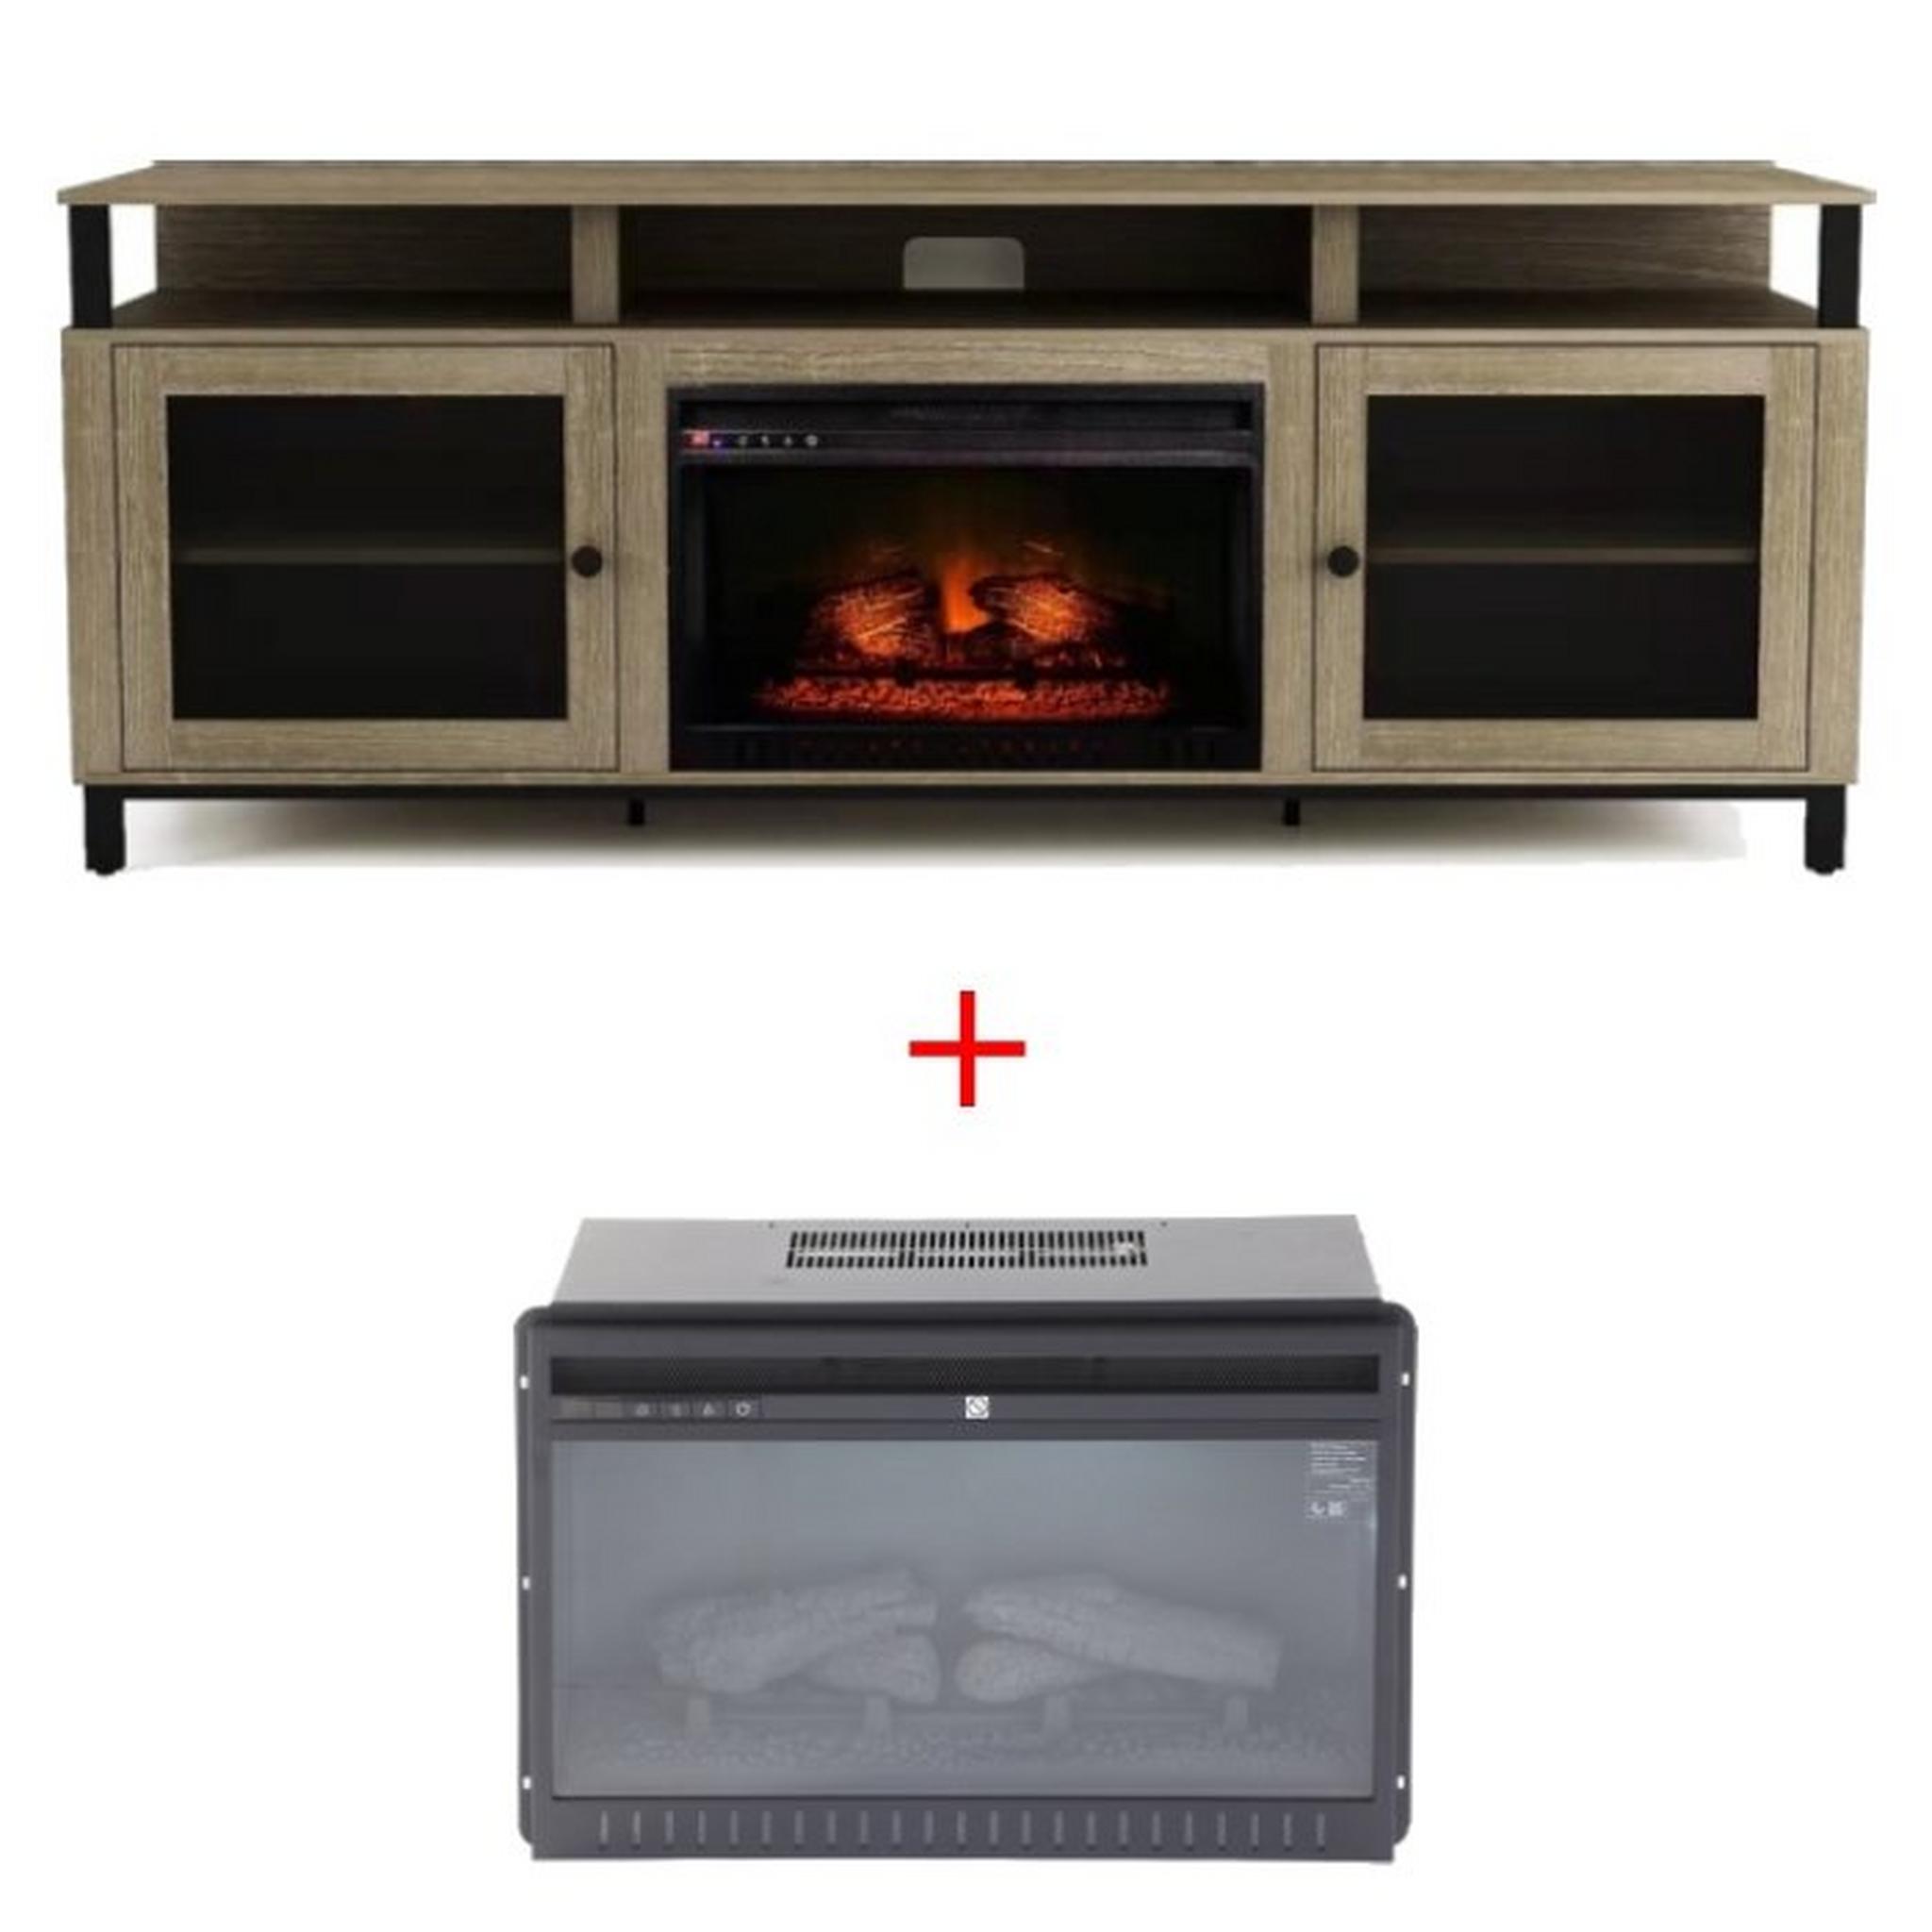 Wansa 85-inch TV Stand with Electric Fireplace - 80kg + Fireplace insert for TV Stand (SF122-26A)